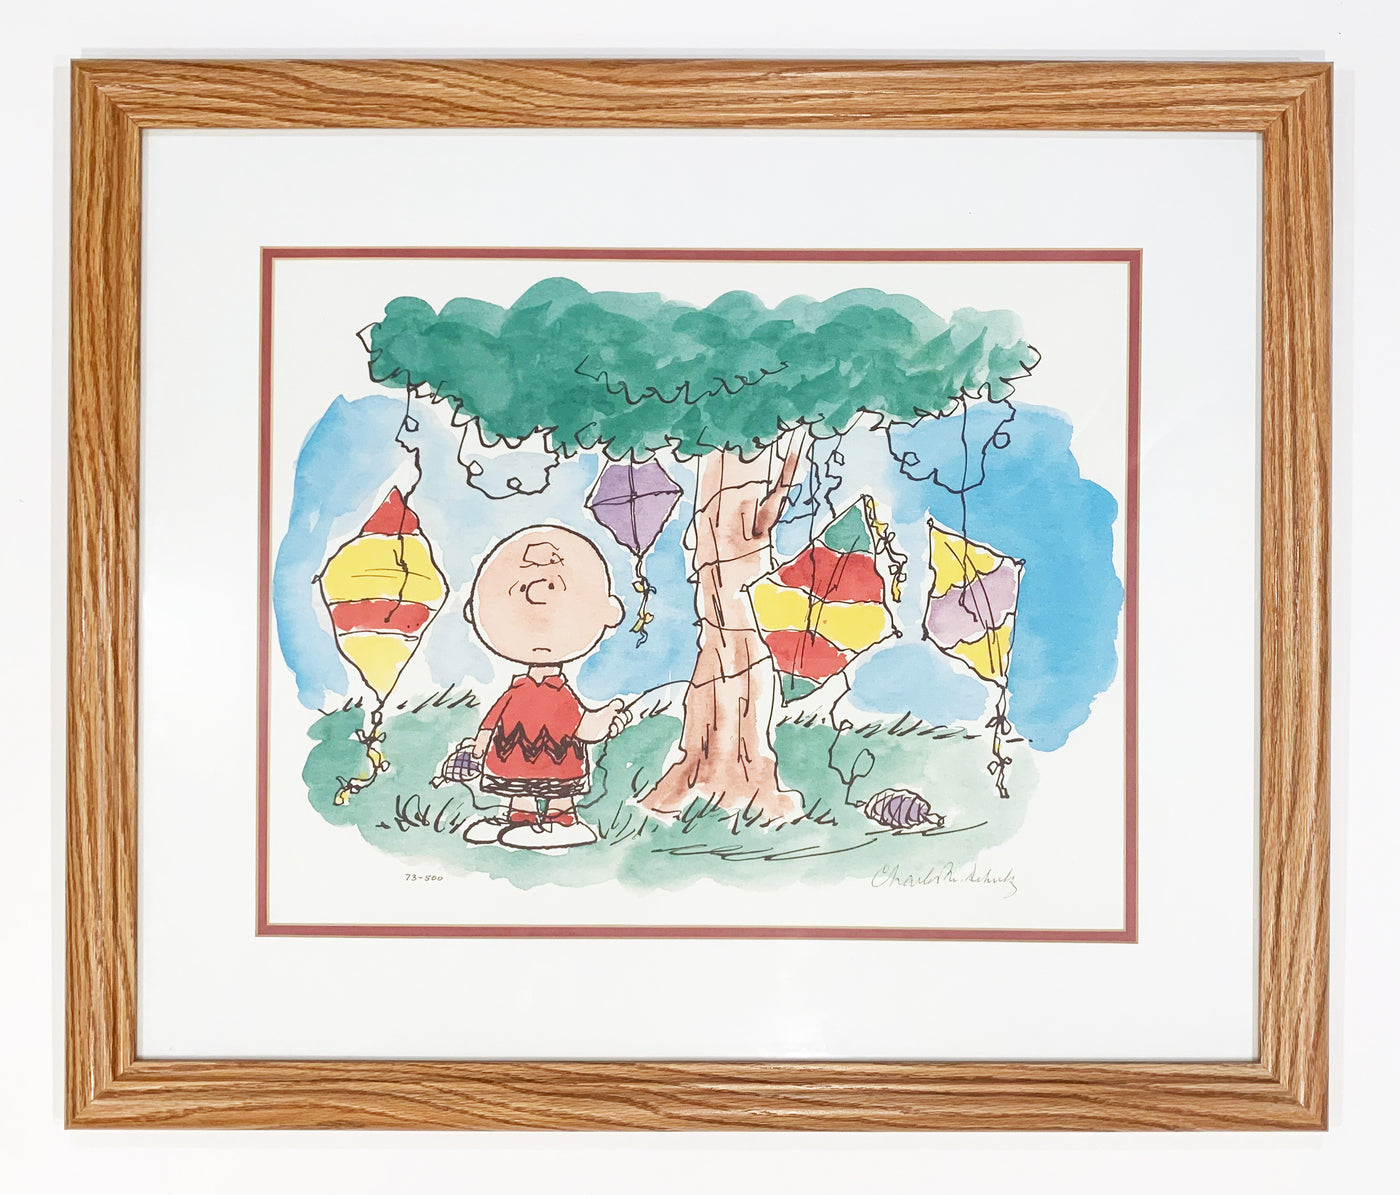 Charles Schulz Signed Lithograph, "Good Grief"